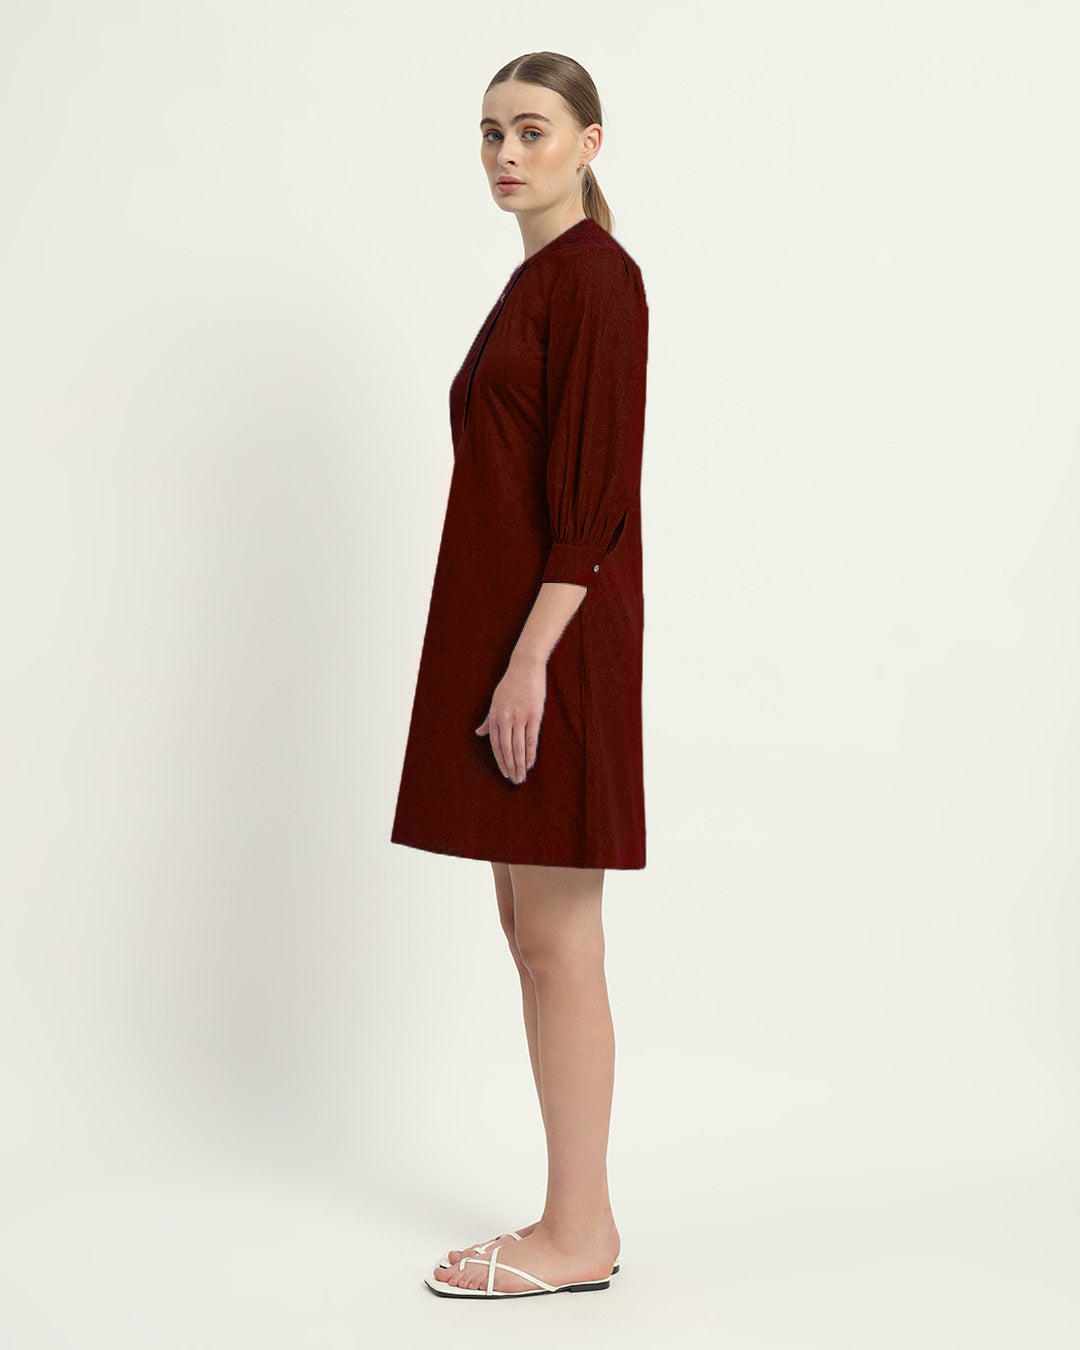 The Roslyn Rouge Cotton Dress